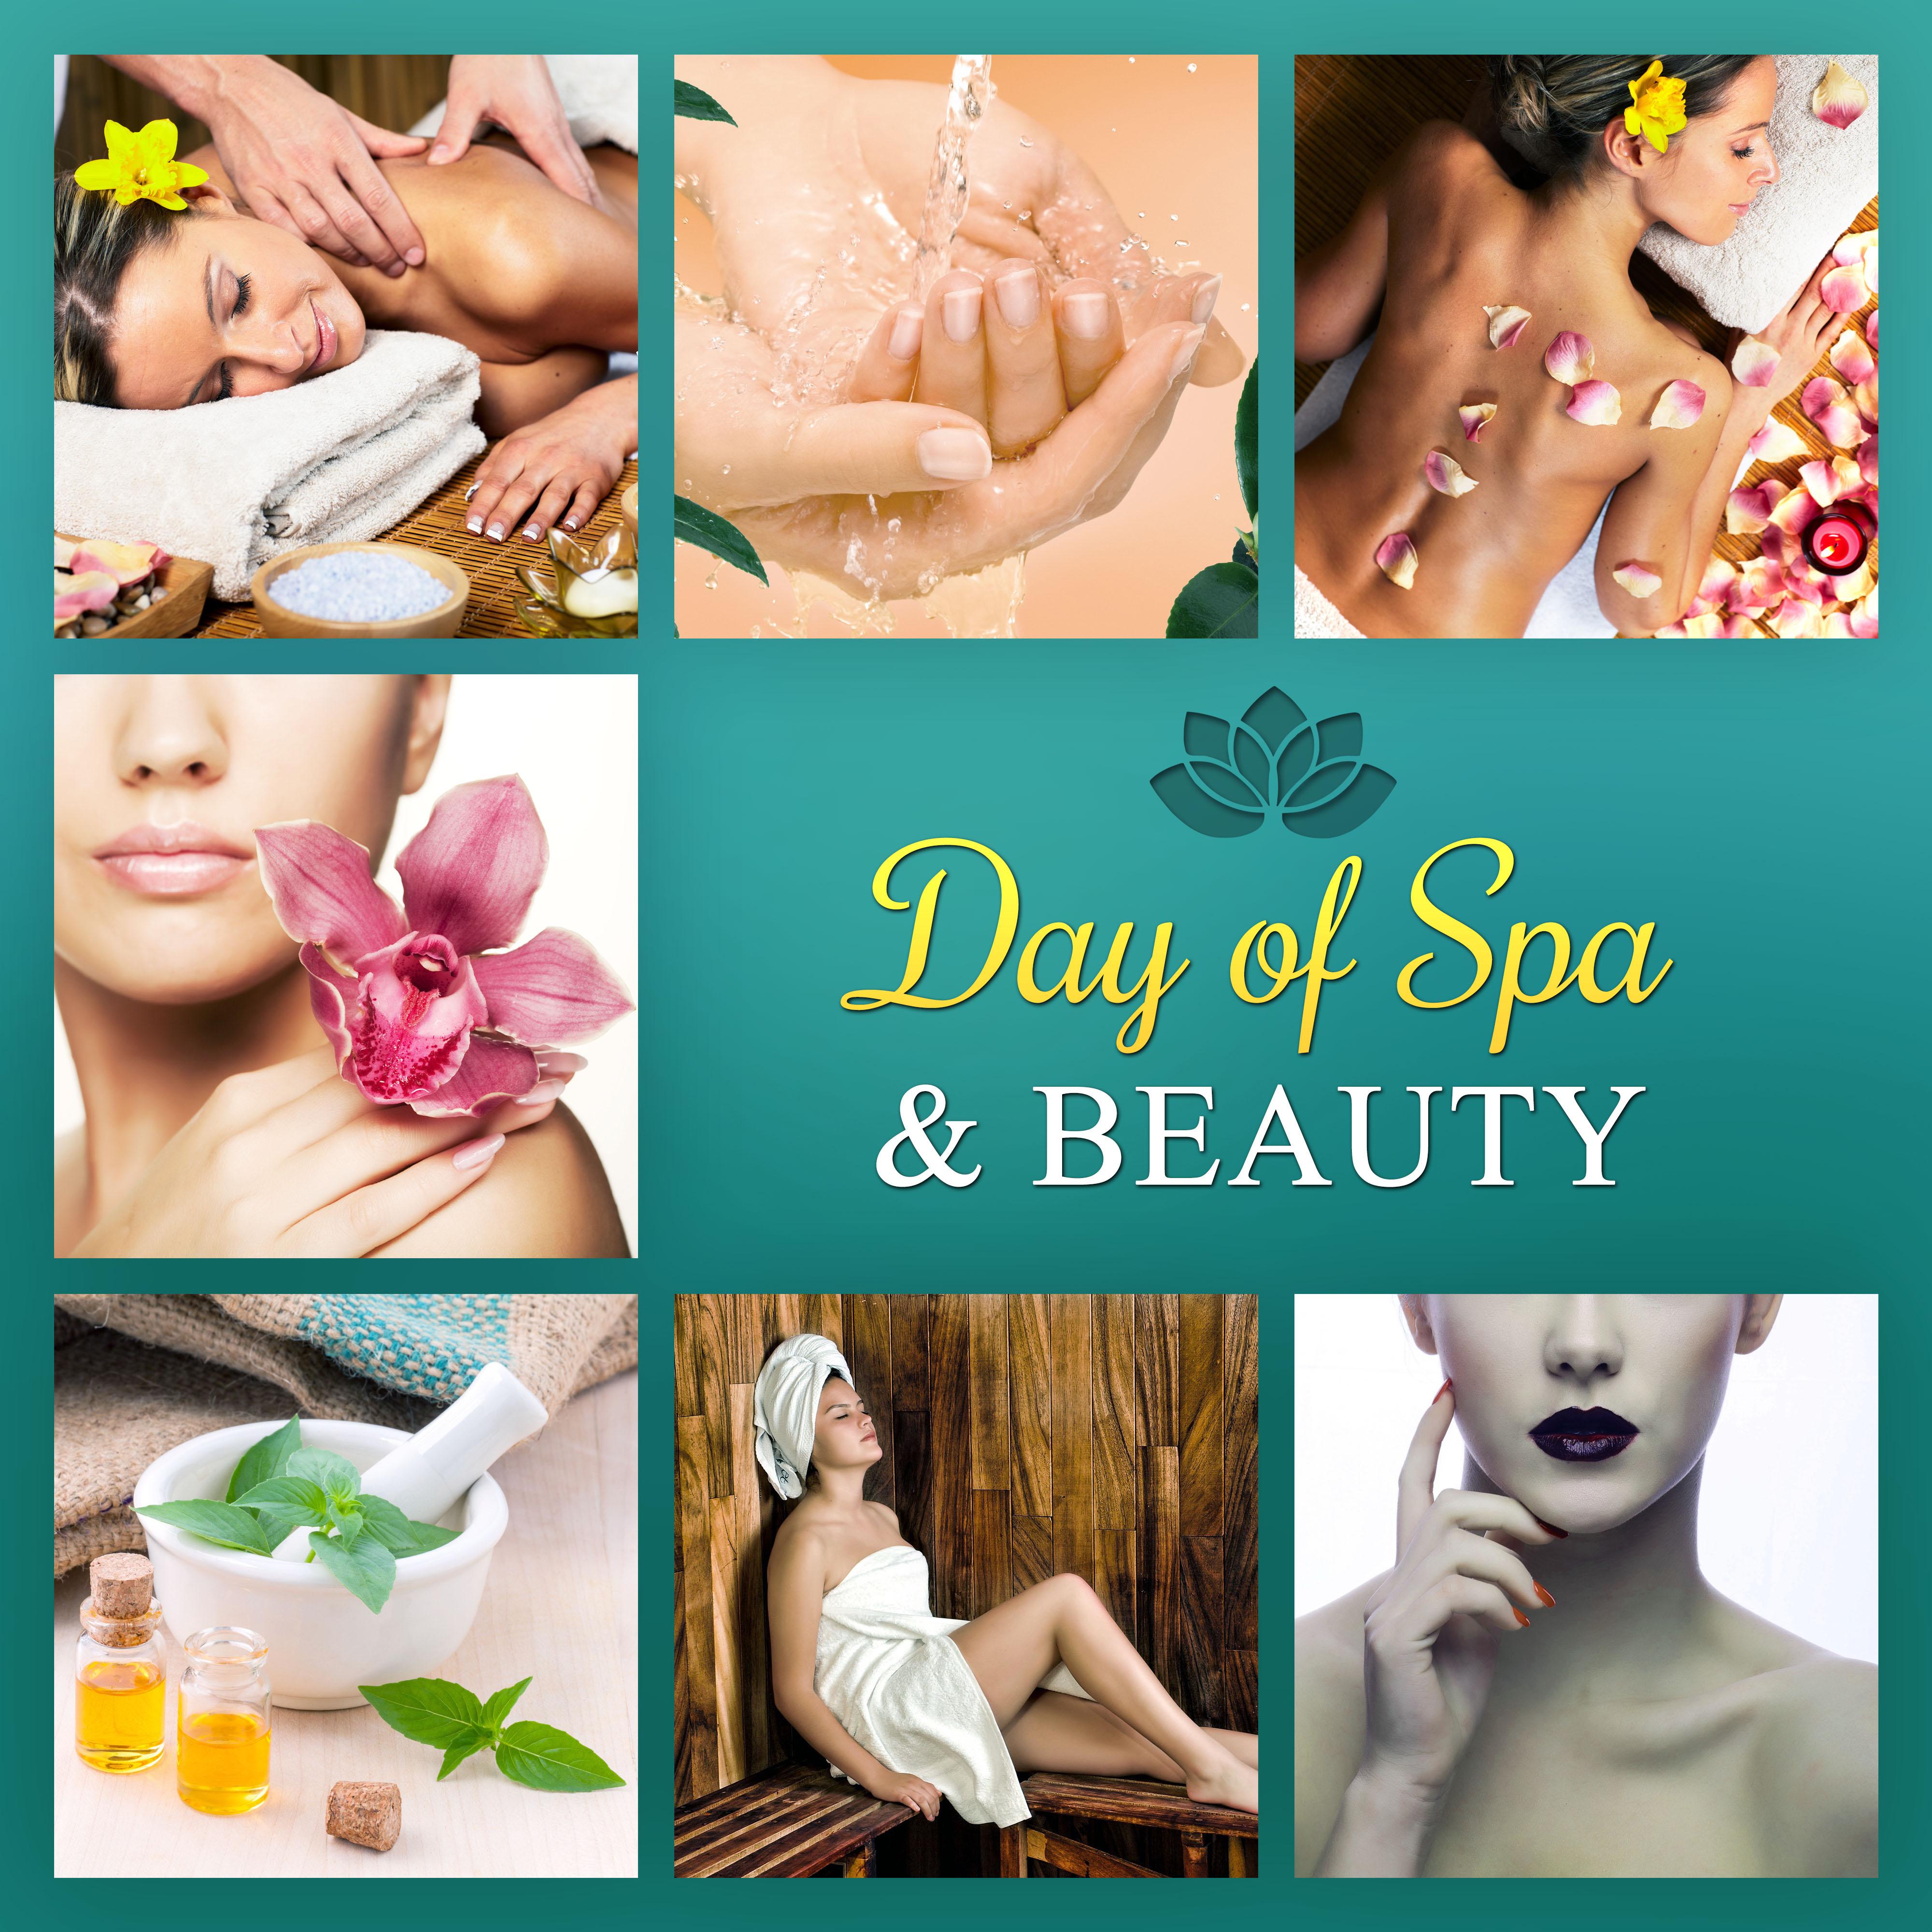 Day of Spa & Beauty – New Age Music for Relaxation while Spa & Wellness Treatments, Best Background to Massage, Sauna, Sound Therapy